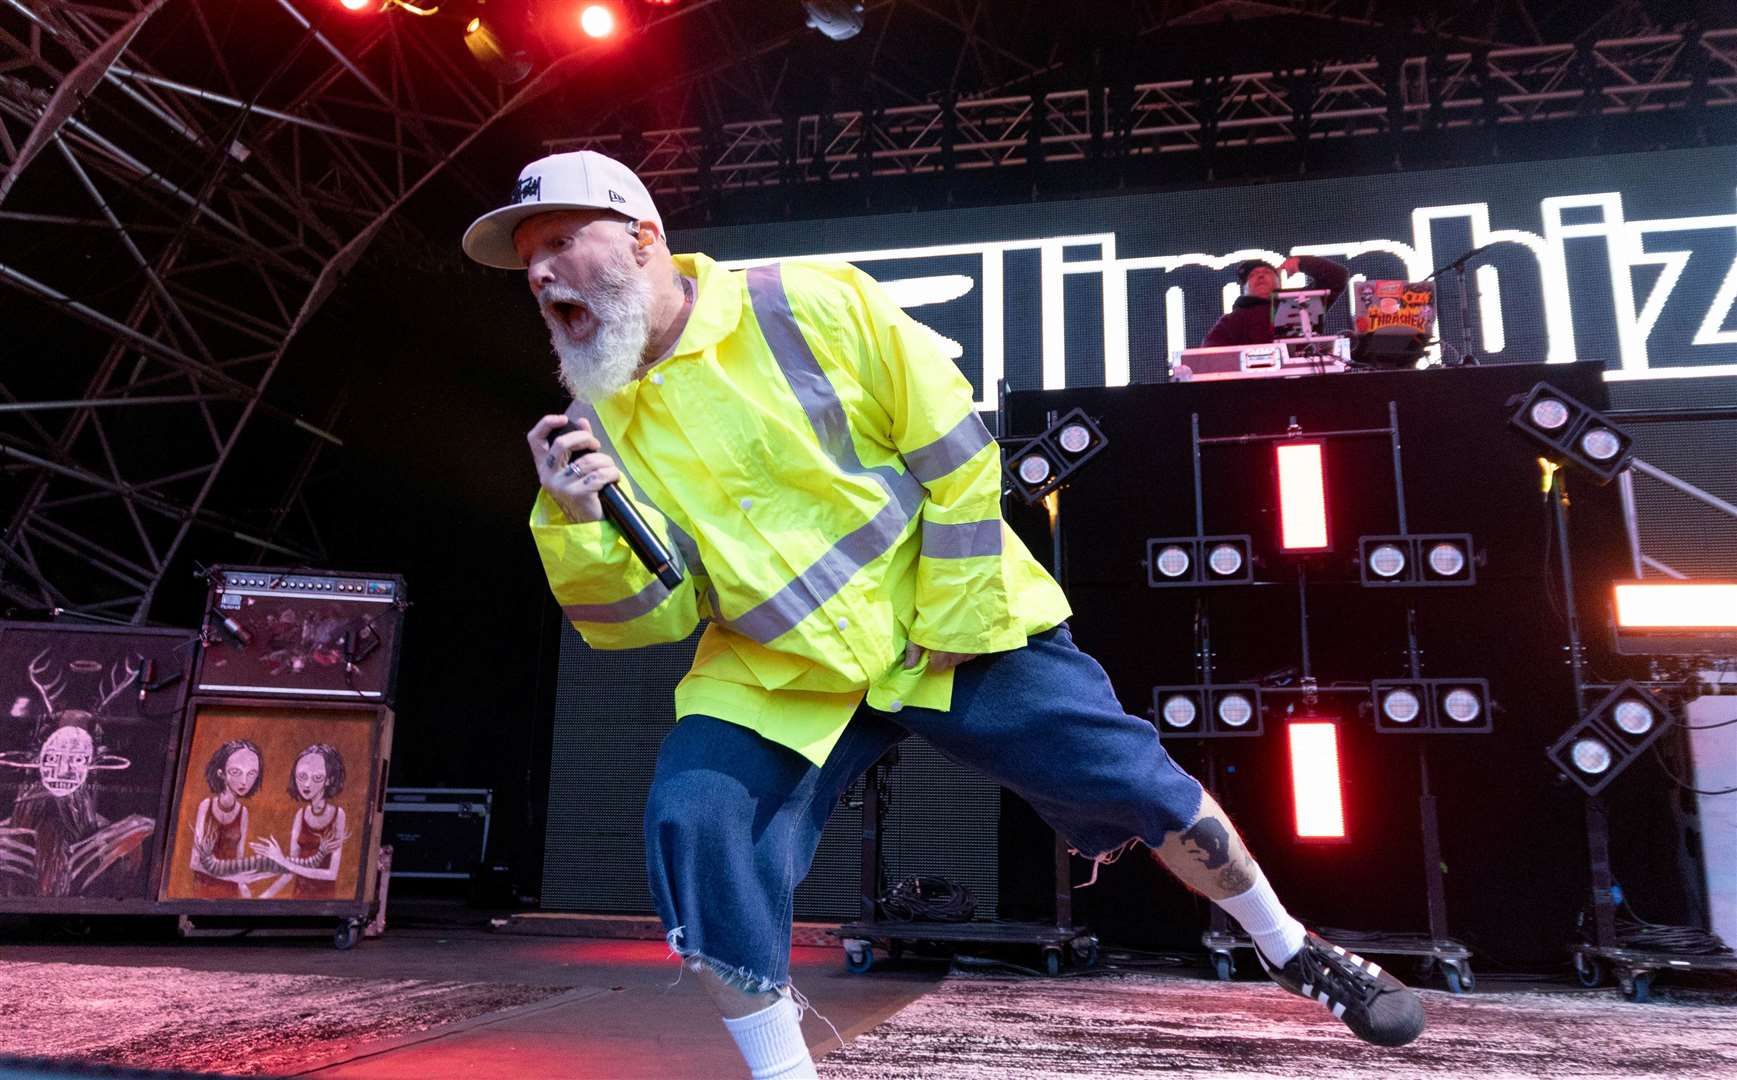 Limp Bizkit frontman Fred Durst looks a little different these days - but he’s still got the frontman energy. Picture: Jasmine Marceau